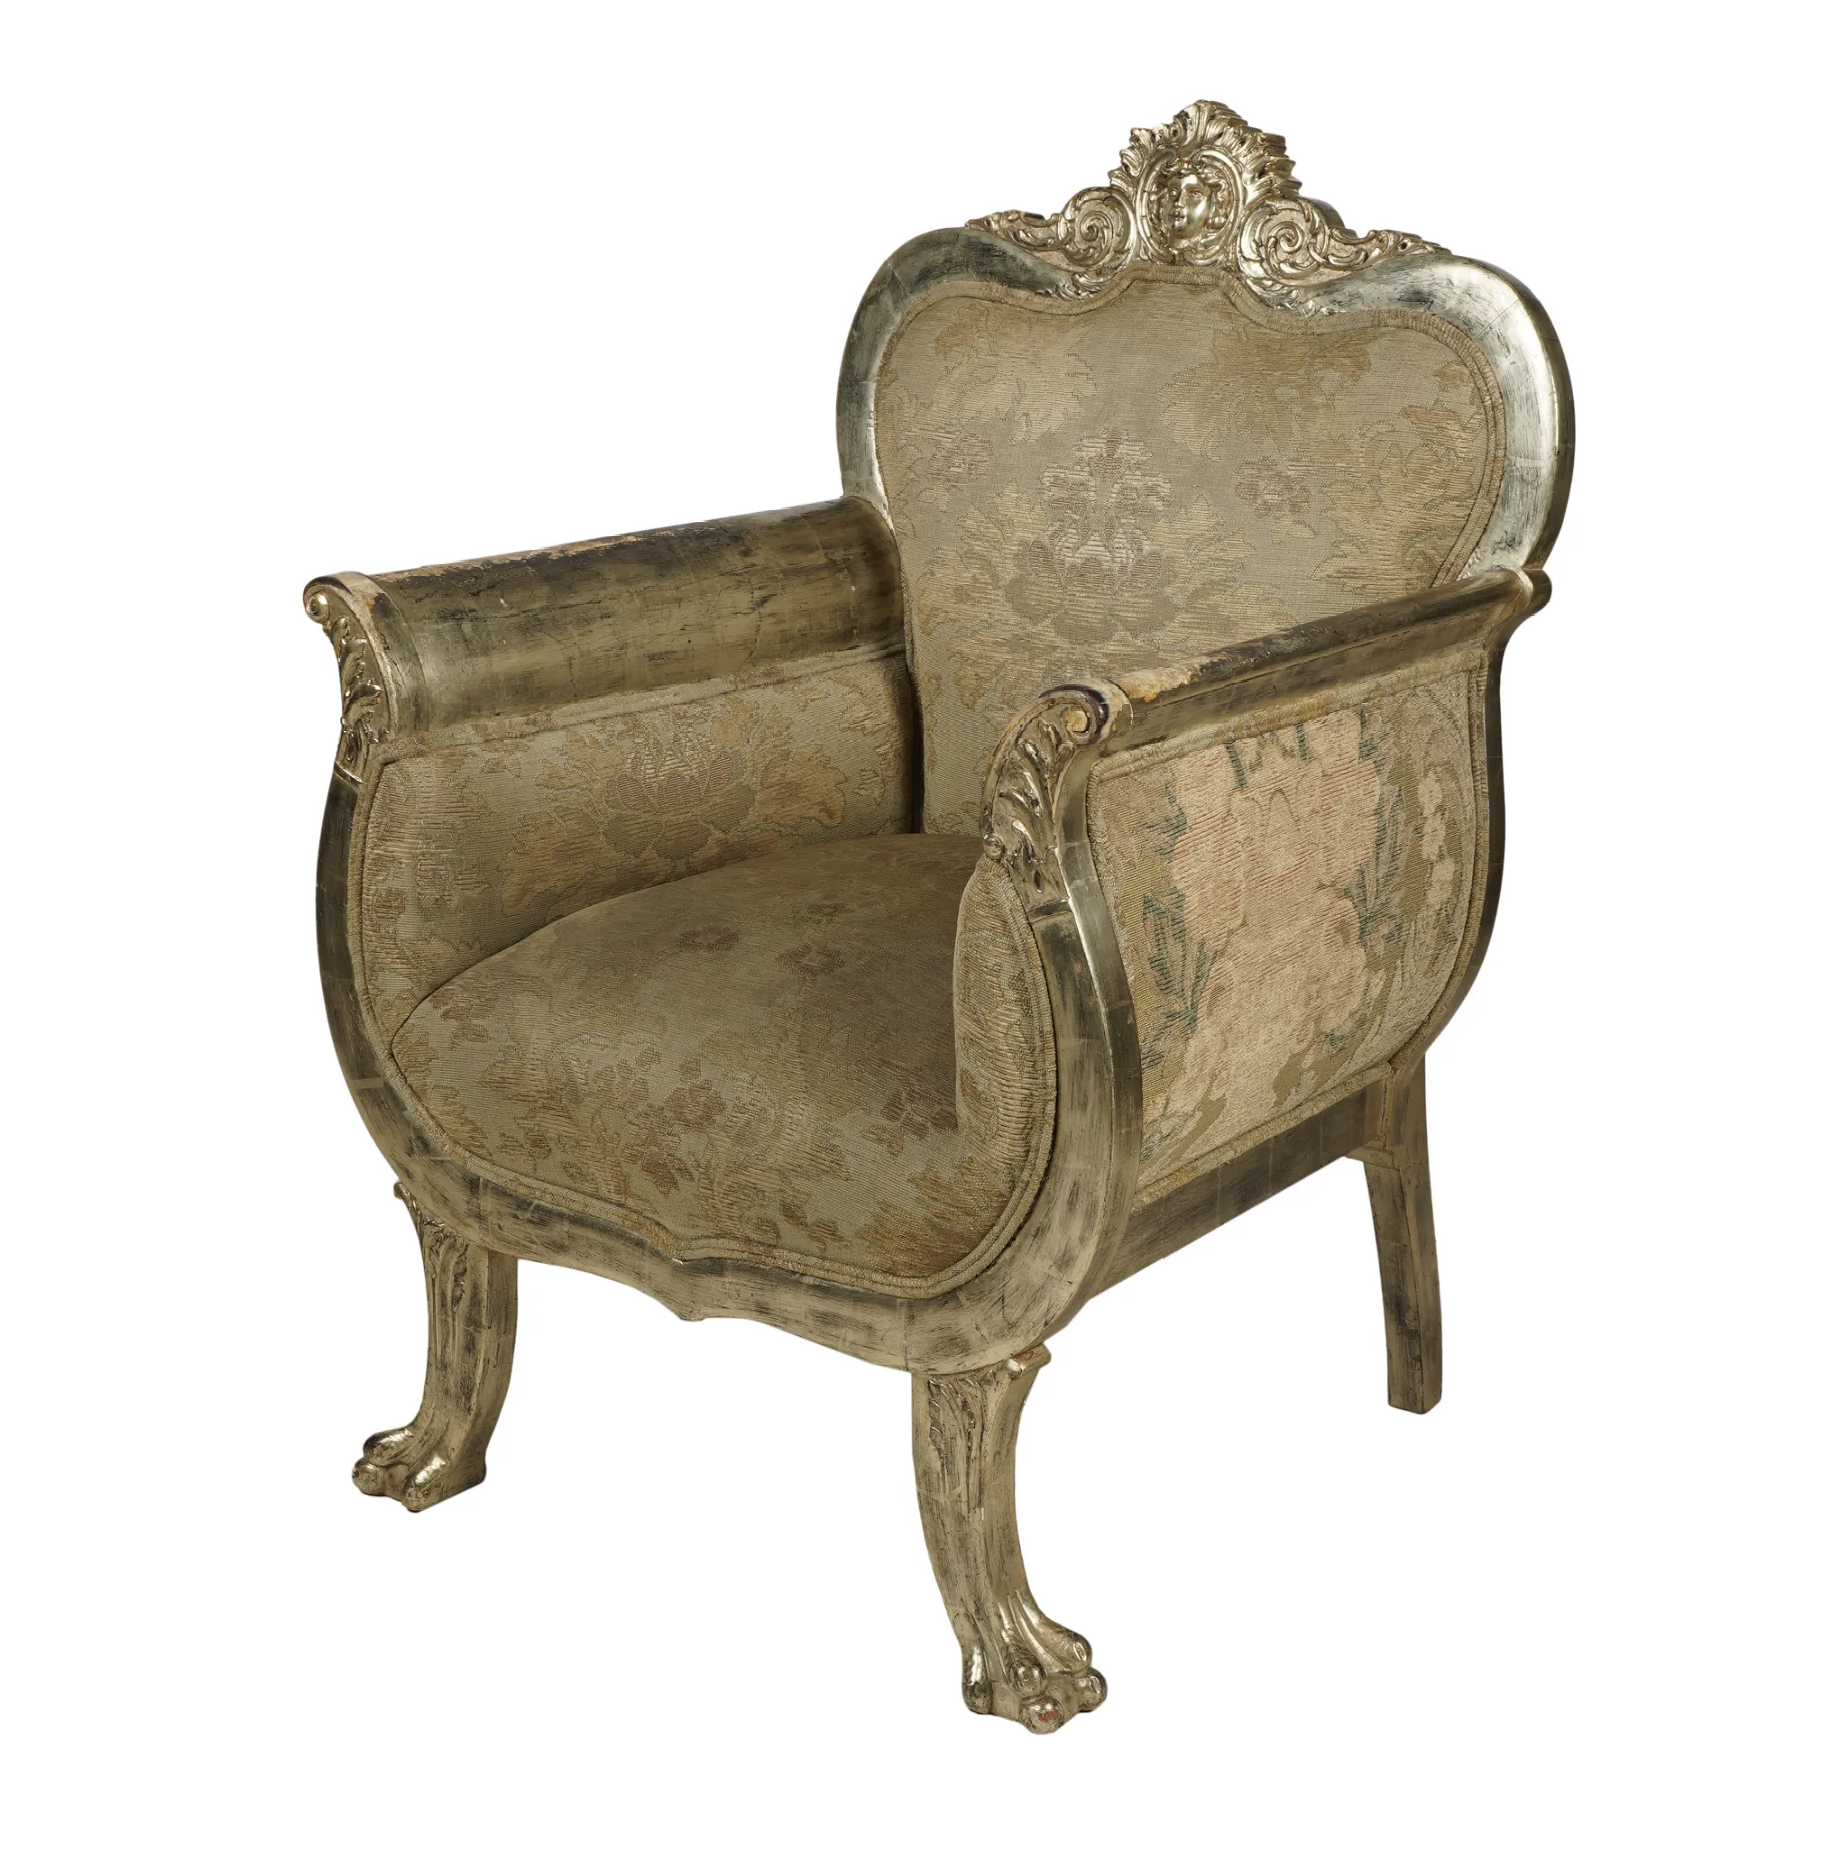 Antique French Rococo Revival Arm Chair | Work of Man